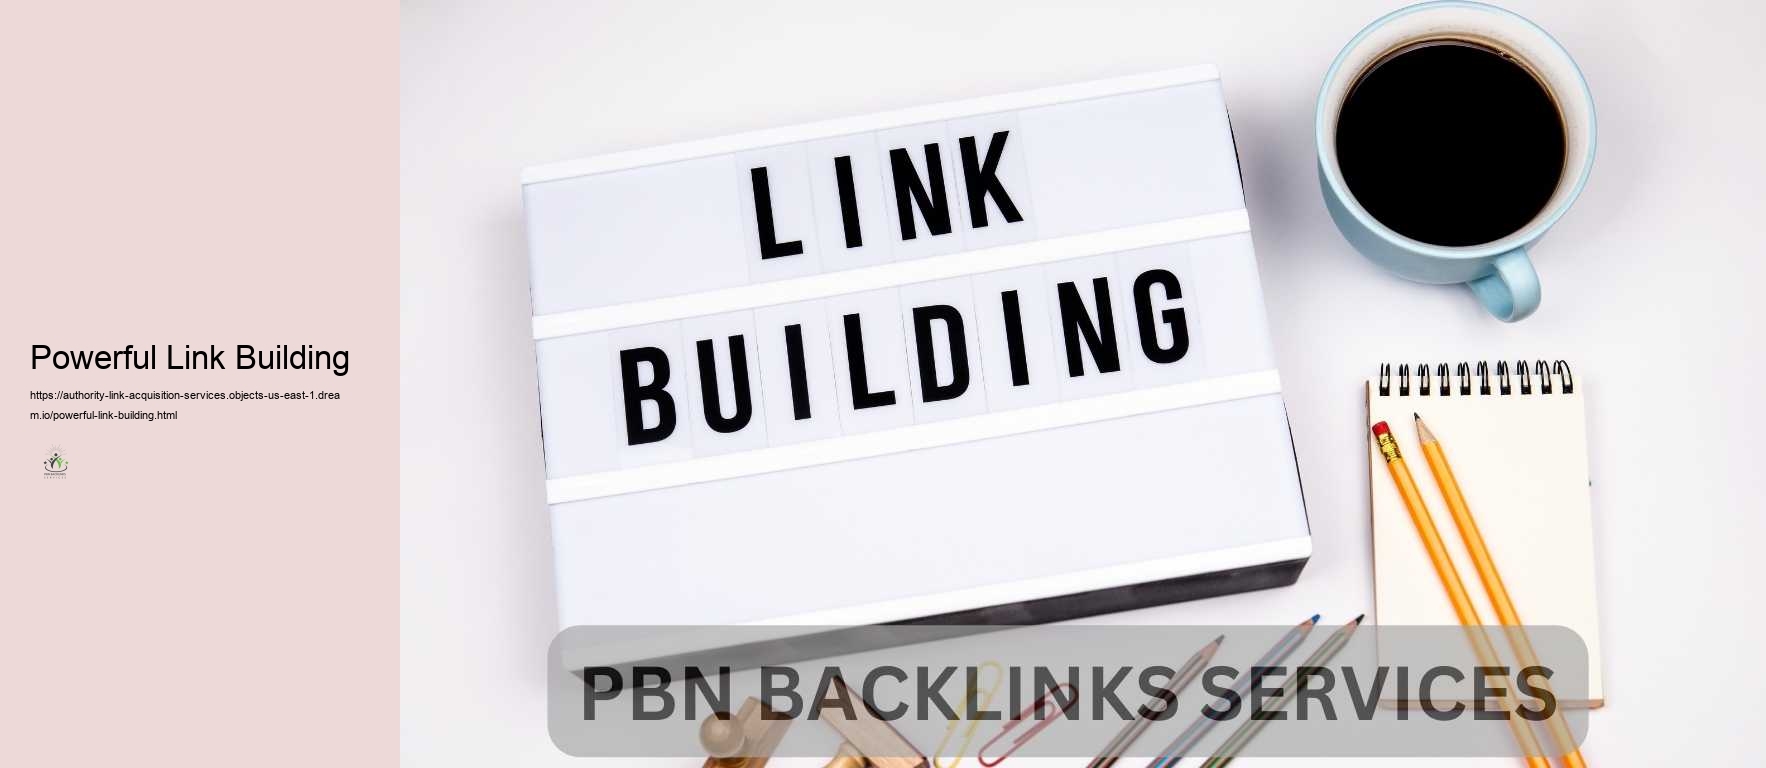 Powerful Link Building